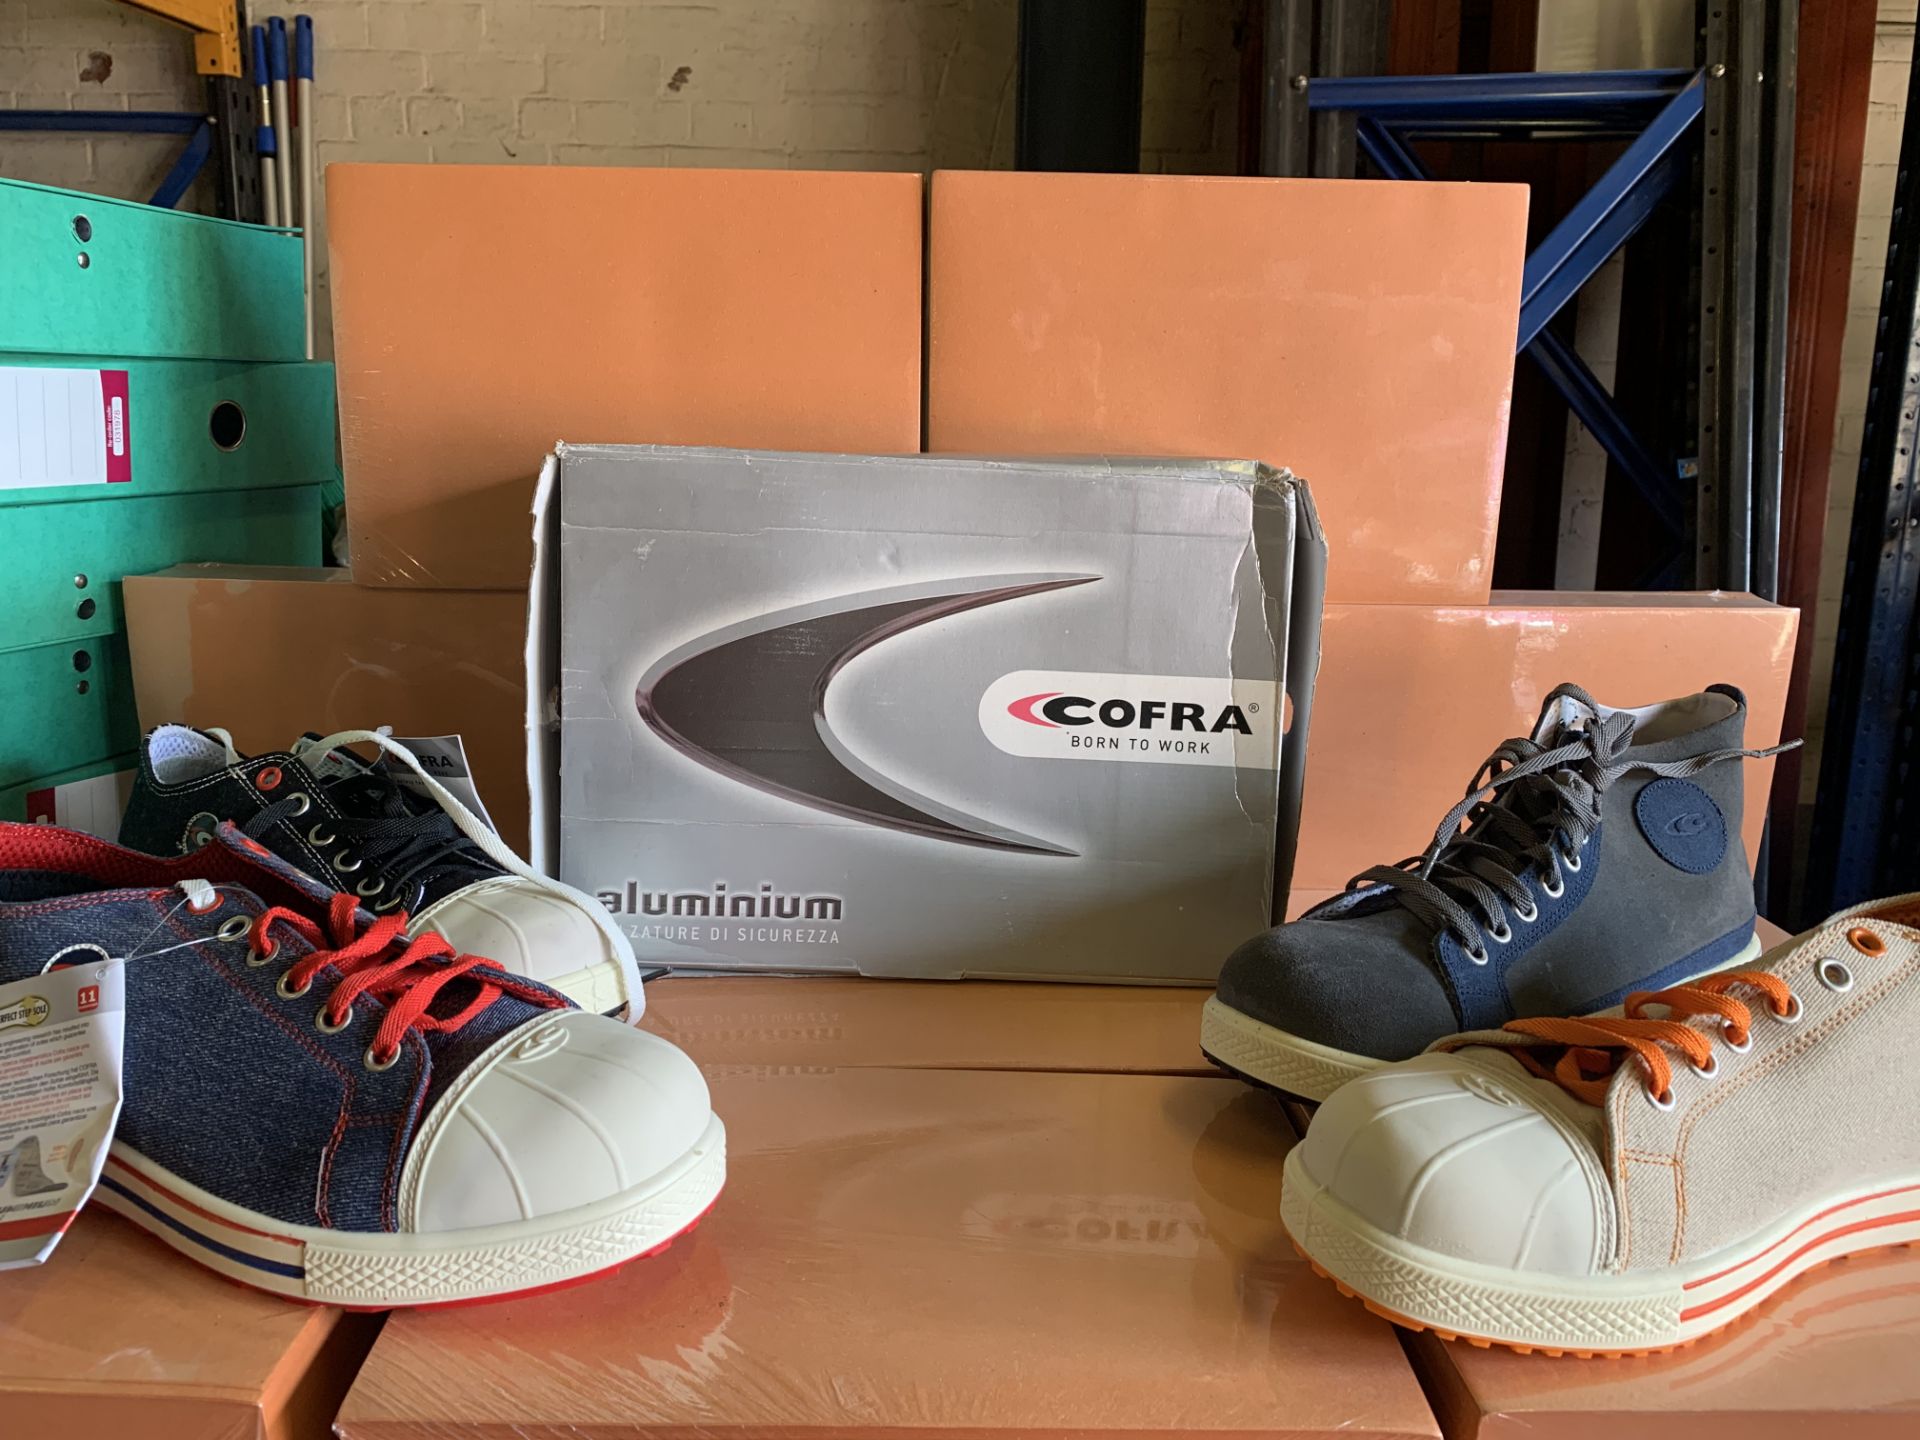 4 x PAIRS OF COFRA HOOK S1 ALUMINIUM SAFETY BOOTS IN SIZE 9 & 10